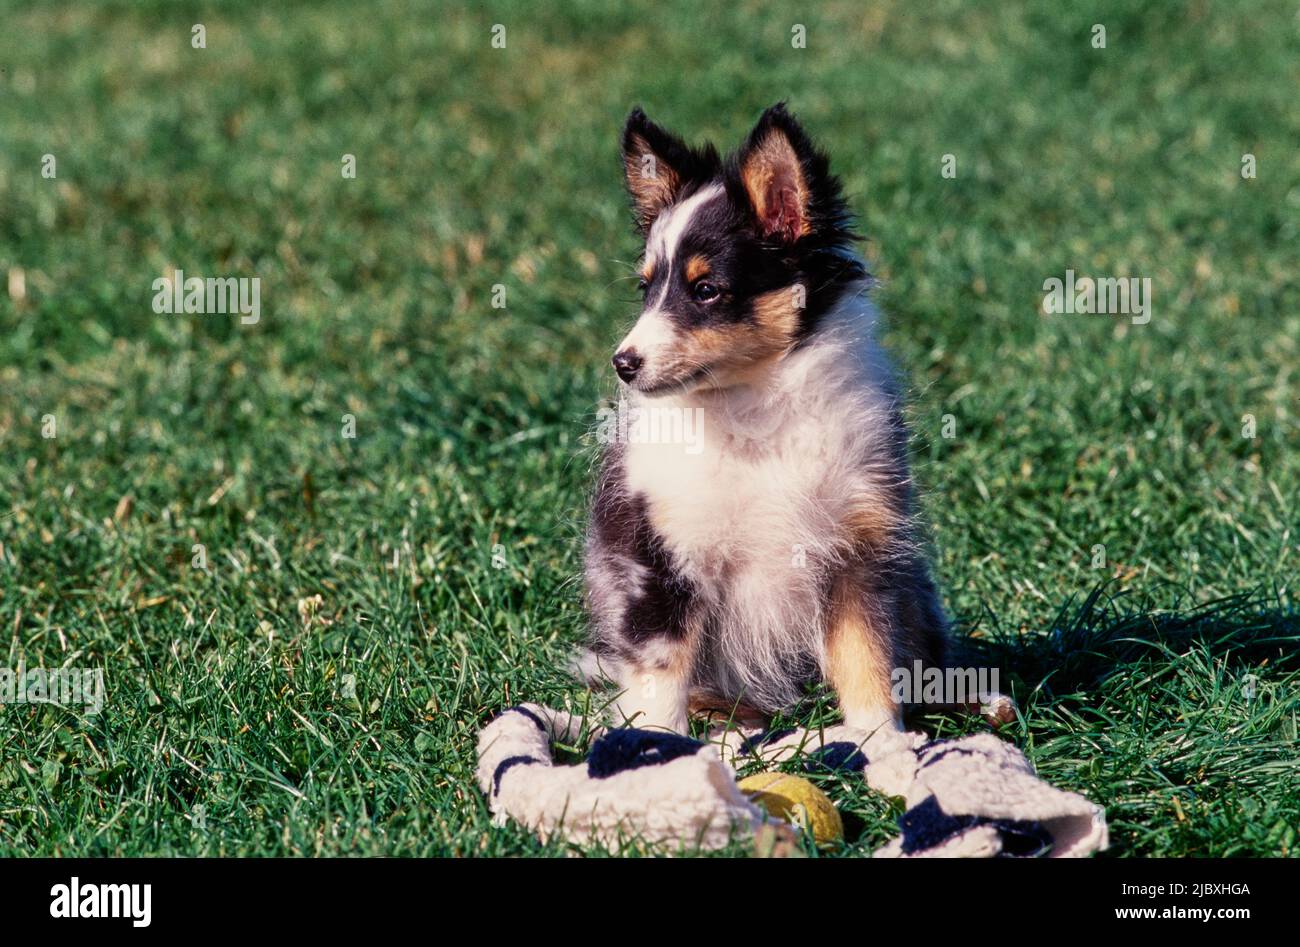 A sheltie puppy dog in a grassy field with wildflowers Stock Photo